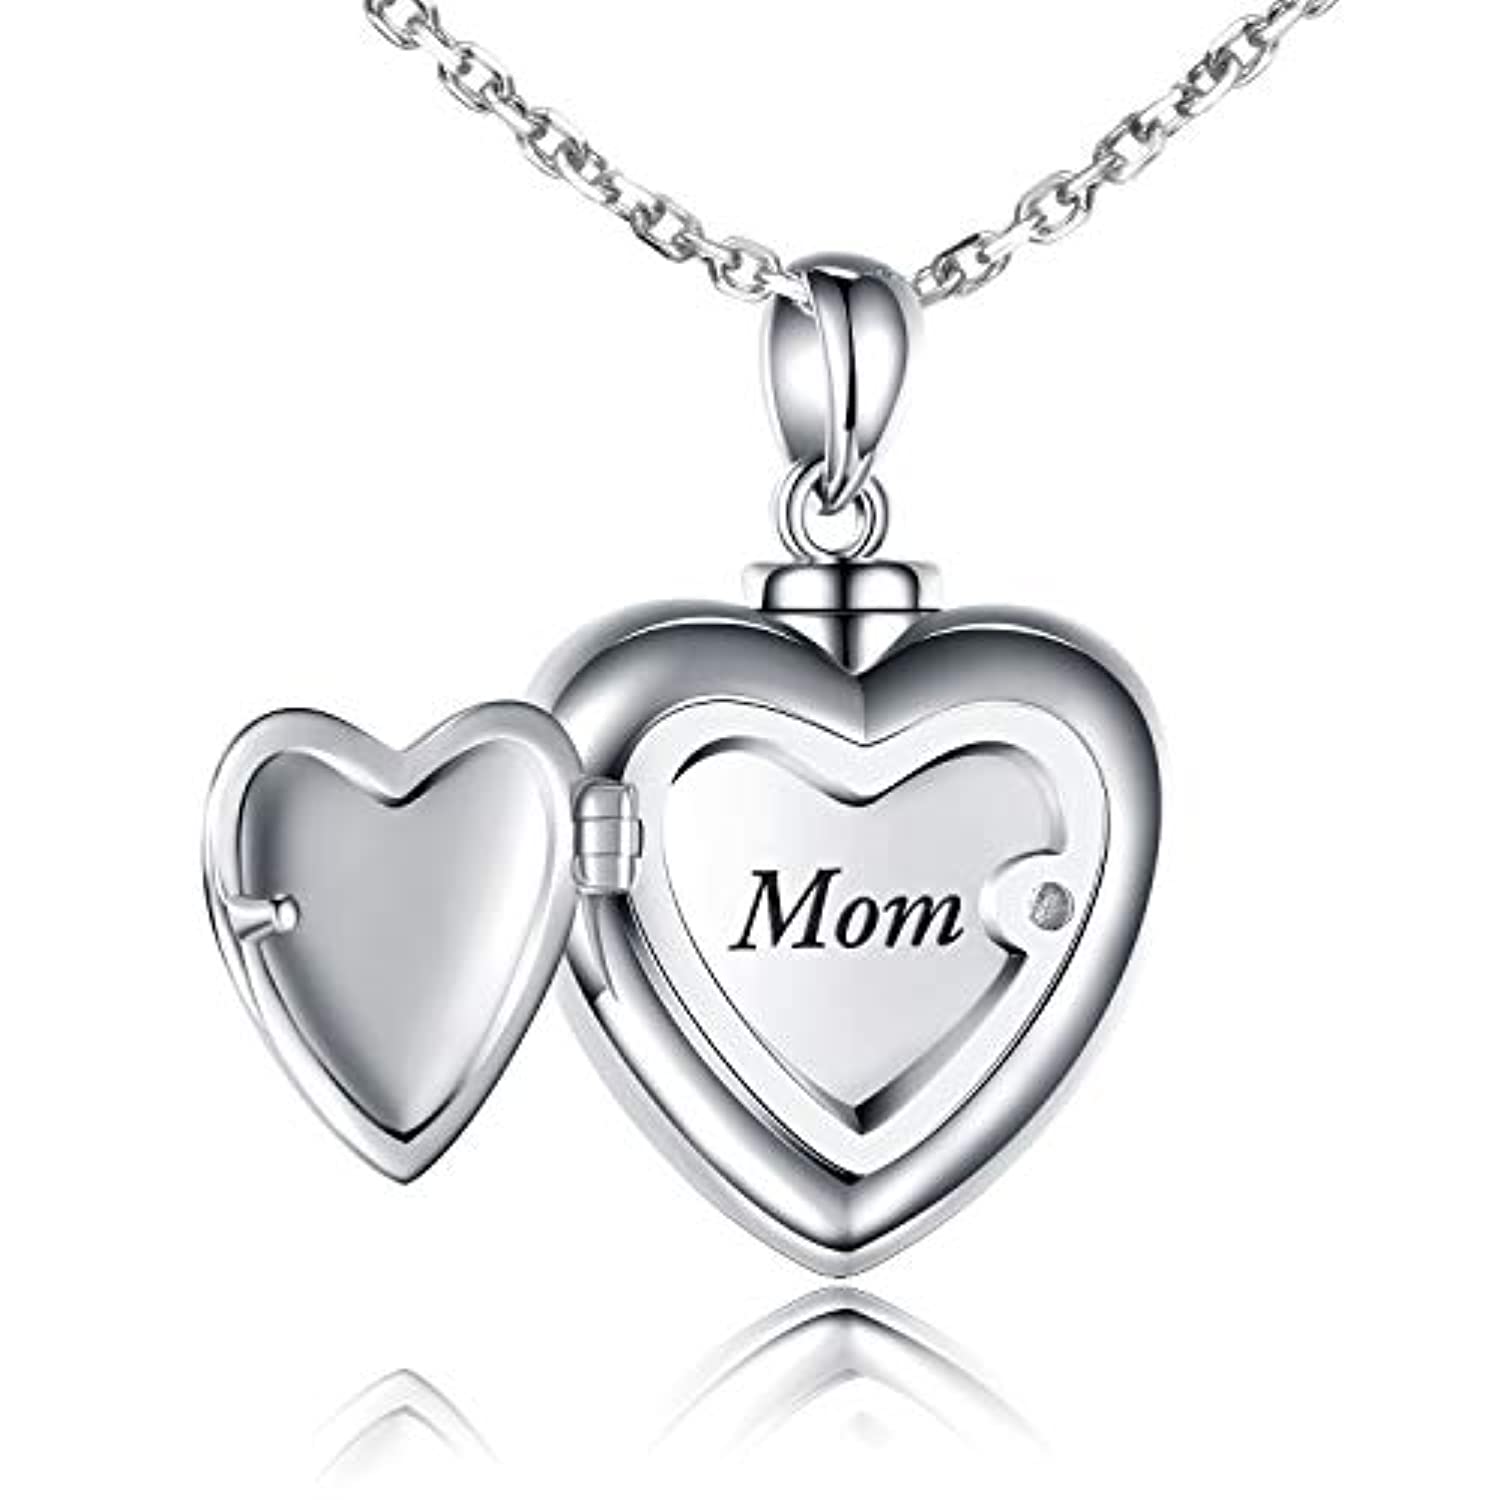 Mom Patterned Gold Heart Cremation Urn Pendant – Love to Treasure